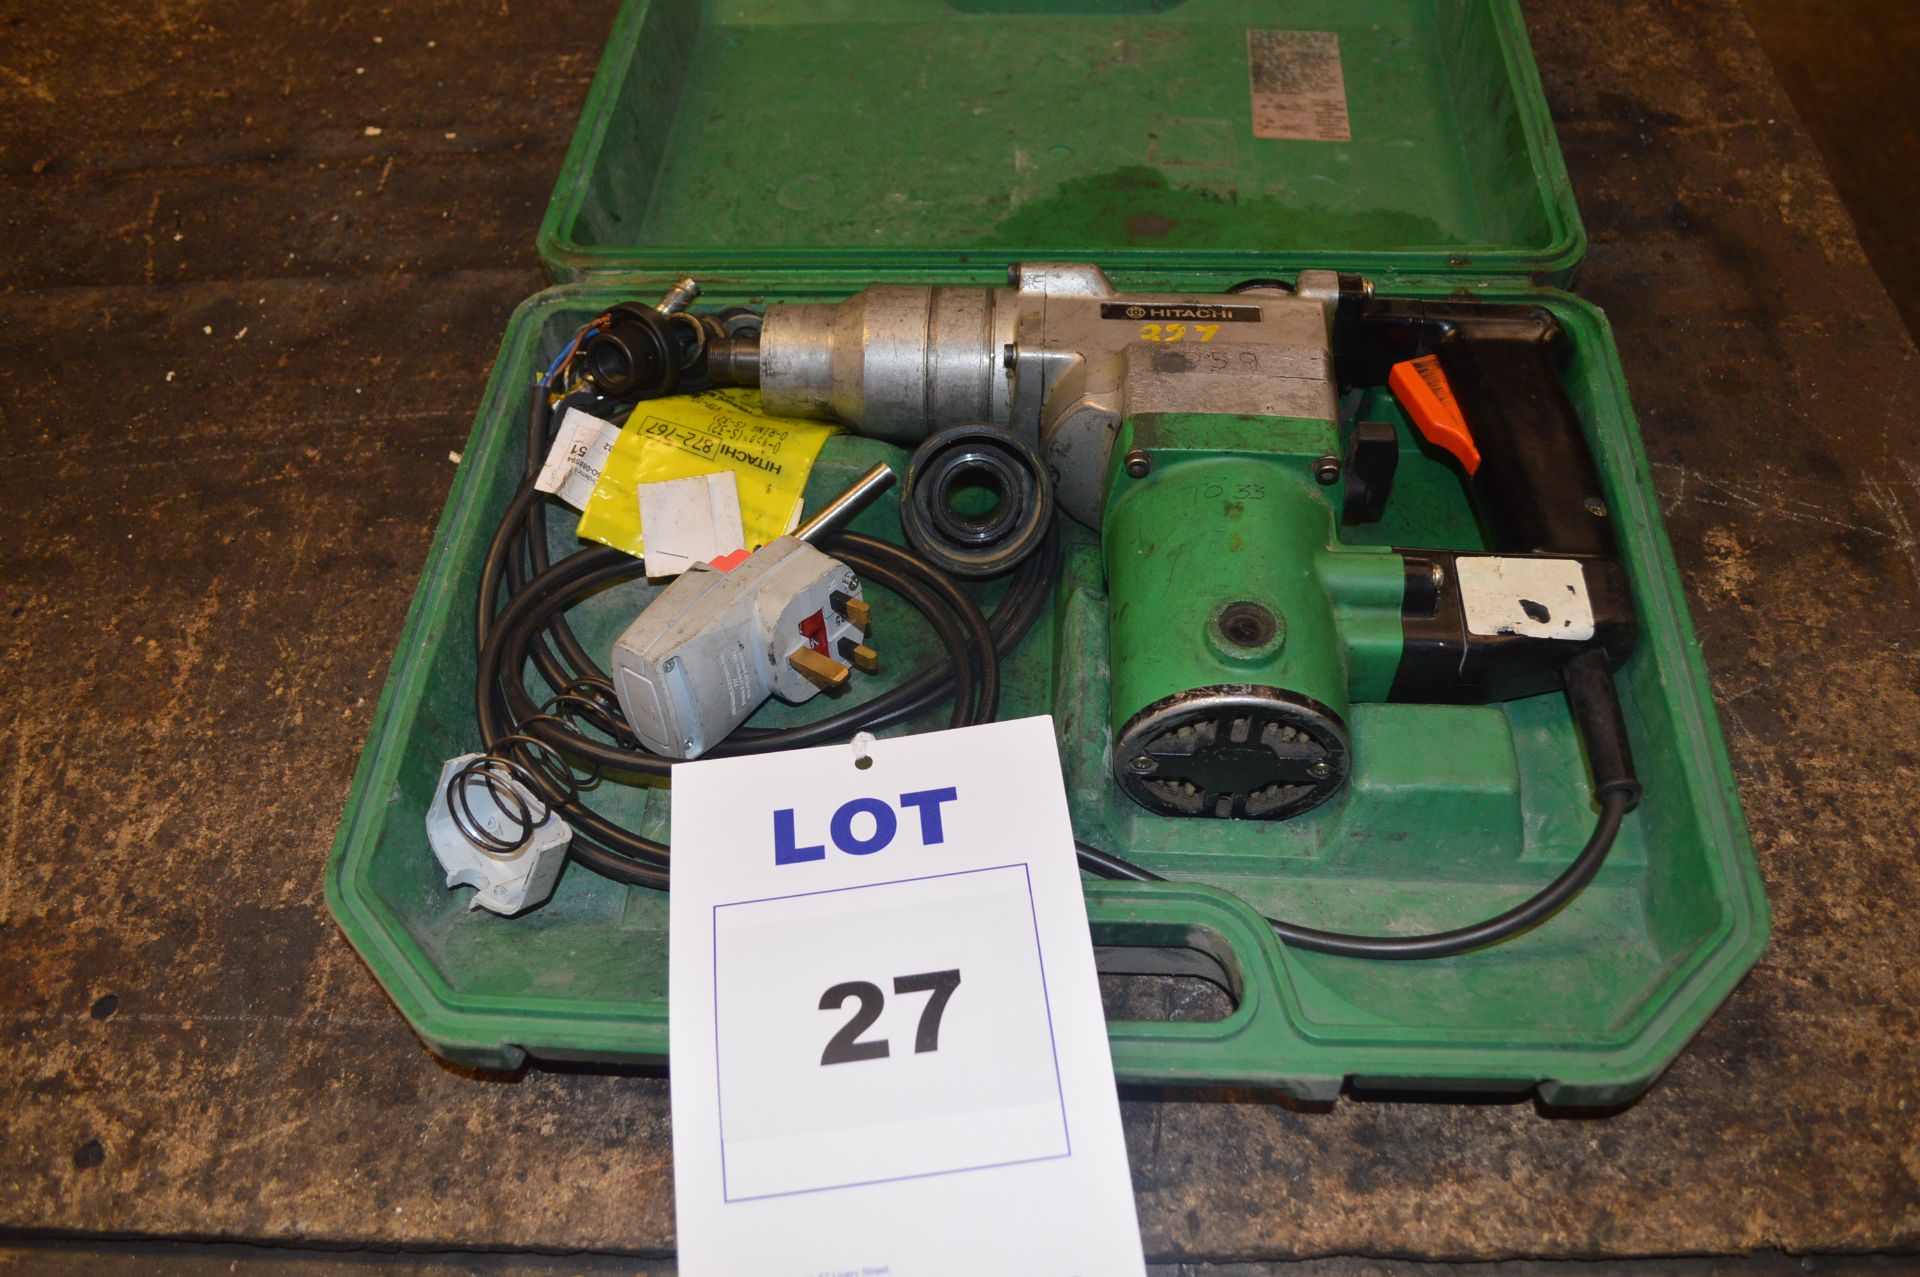 Hitachi Drill with Carry Case 
(spares or repair)
located at Spa Gates Ltd, Blick Road, Warwick CV34